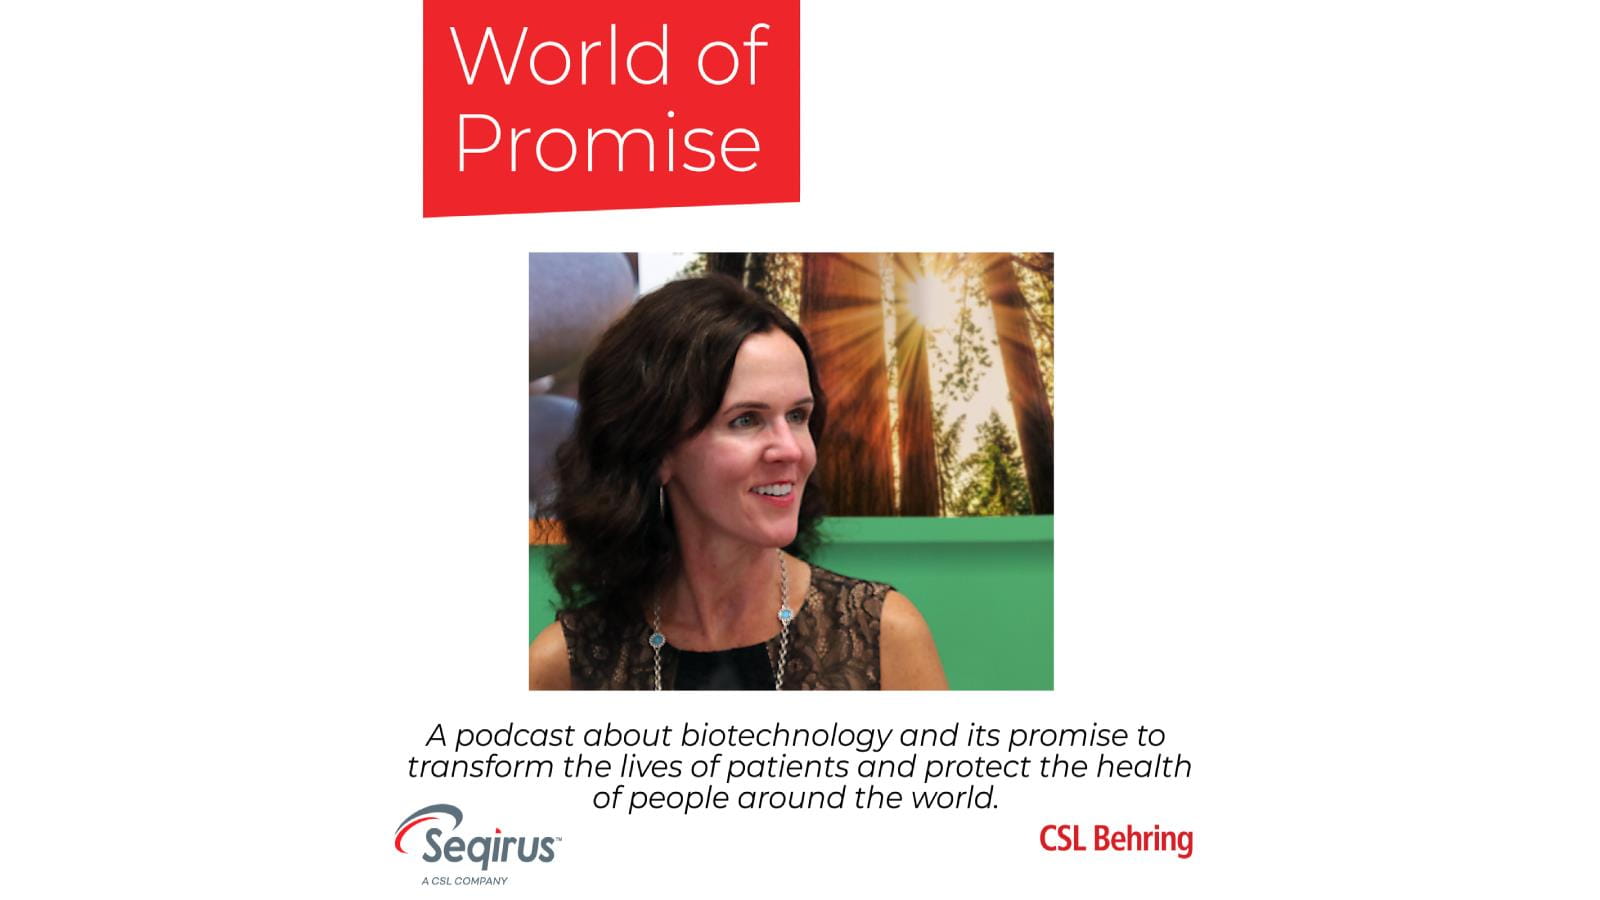 Elizabeth Walker, Executive Vice President and Chief Human Resources Officer for CSL Limited